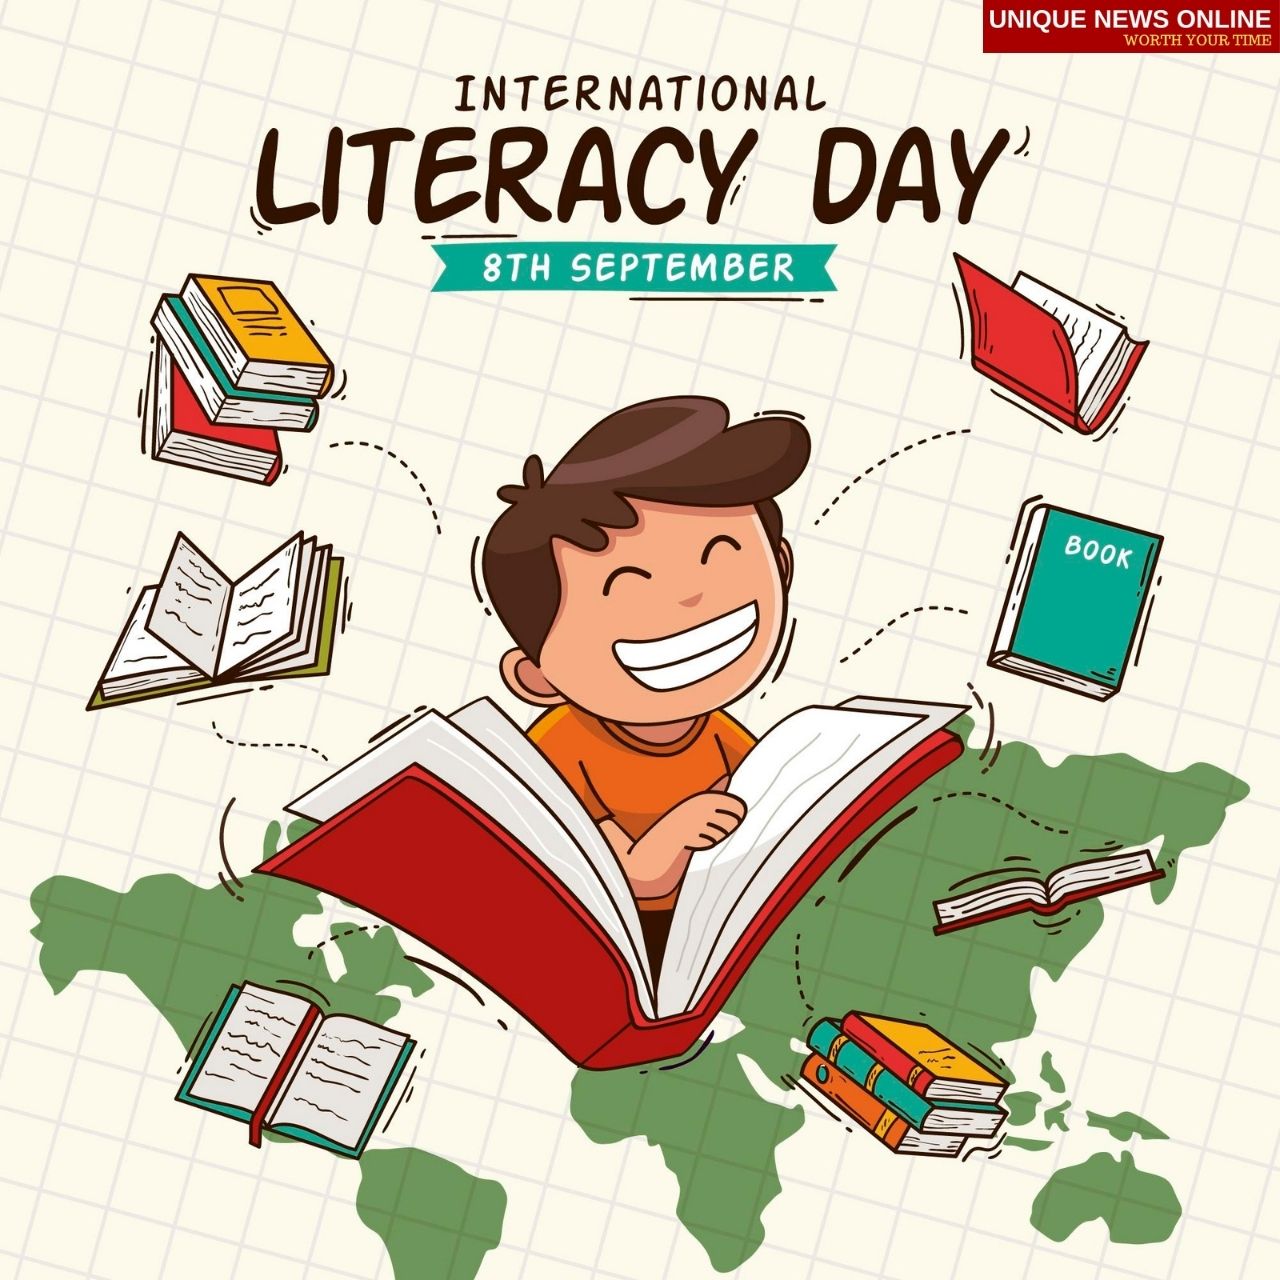 International Literacy Day 2021 Quotes, Poster, HD Images, Messages, and Status to share,